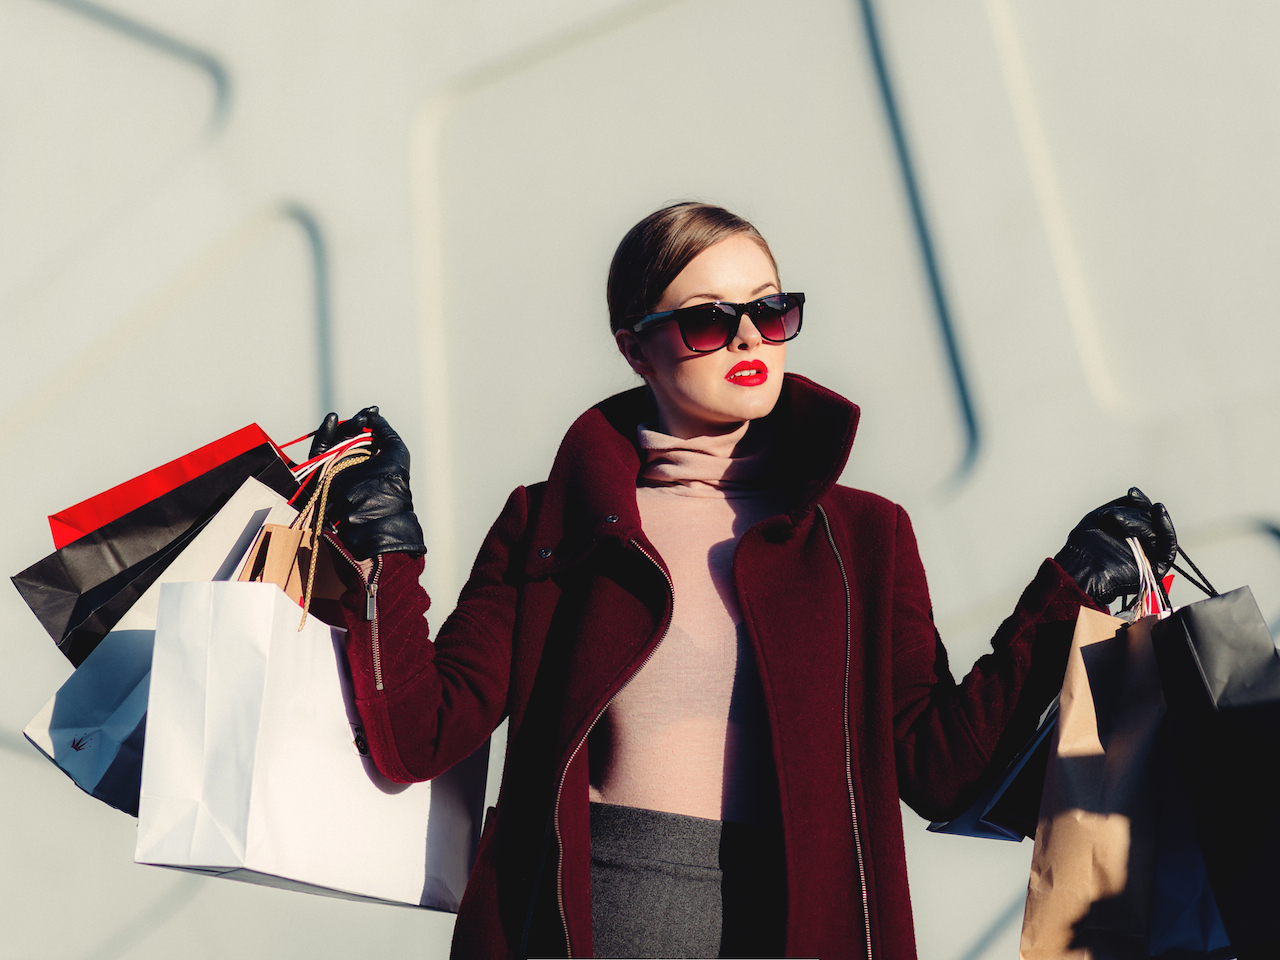 Why Do We Care So Much About How Women Spend Their Money?